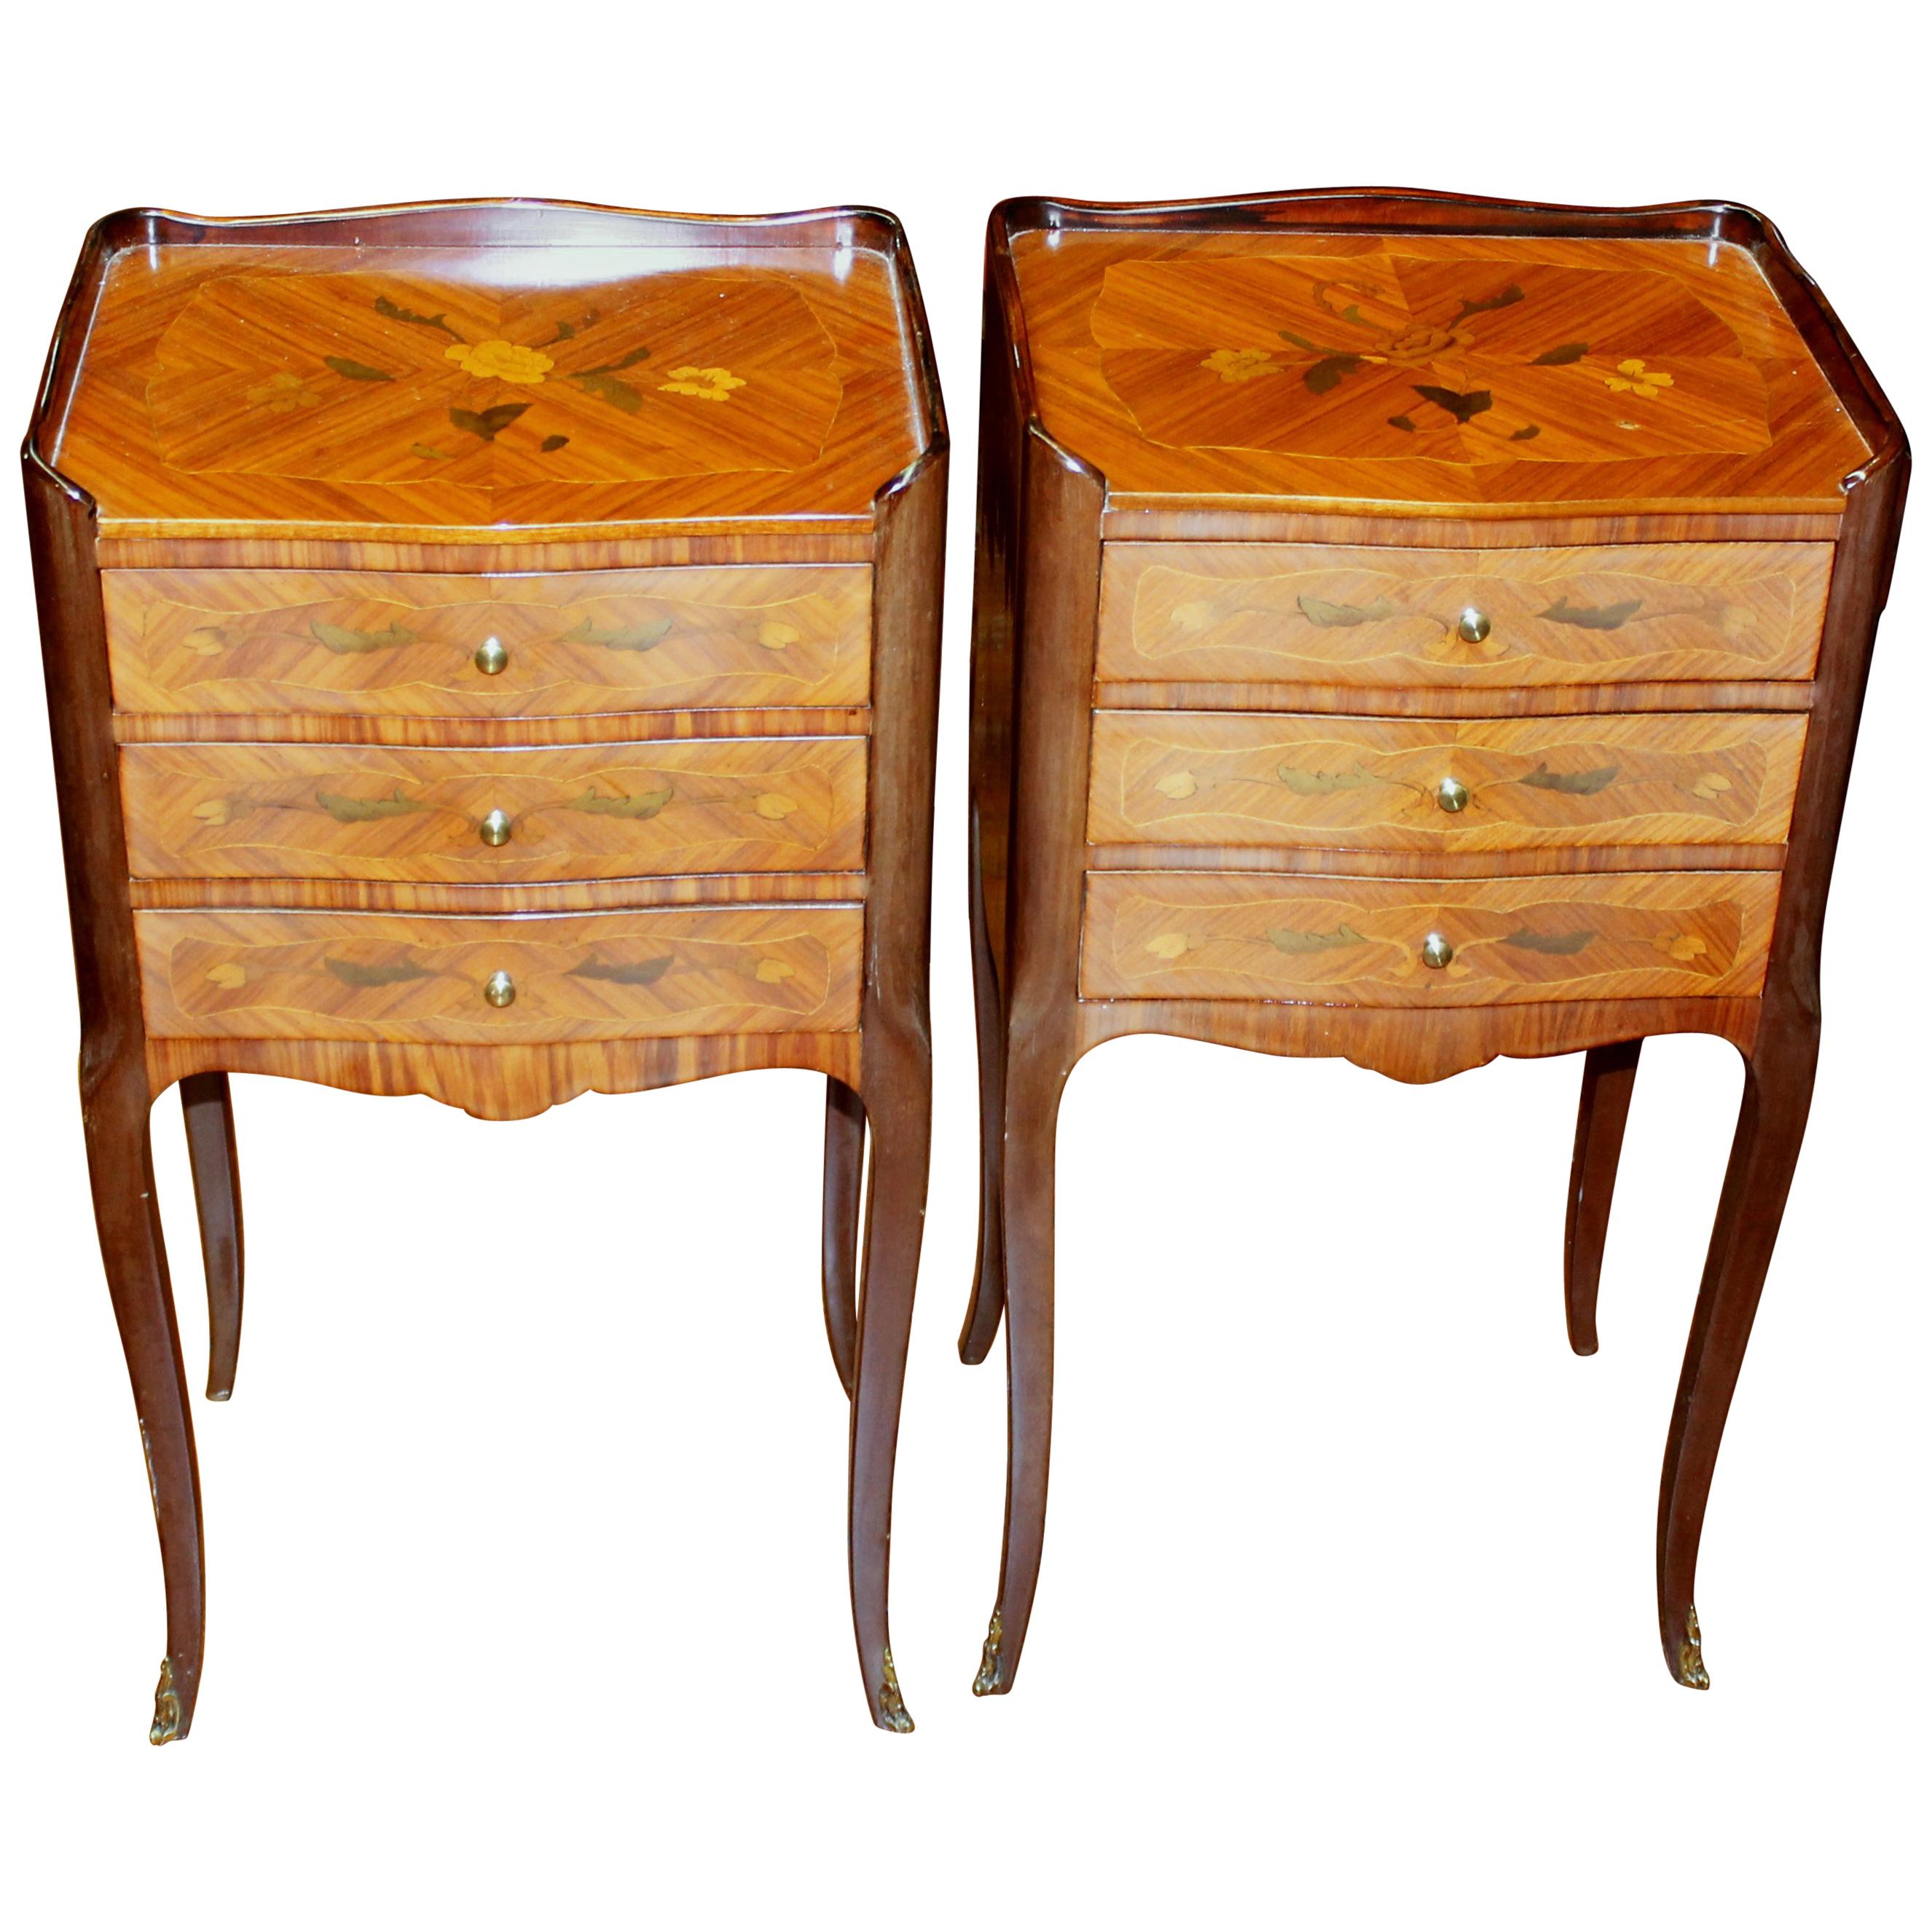 Pair of Old French Louis XV style Marquetry Inlaid Kingwood Bedside Tables